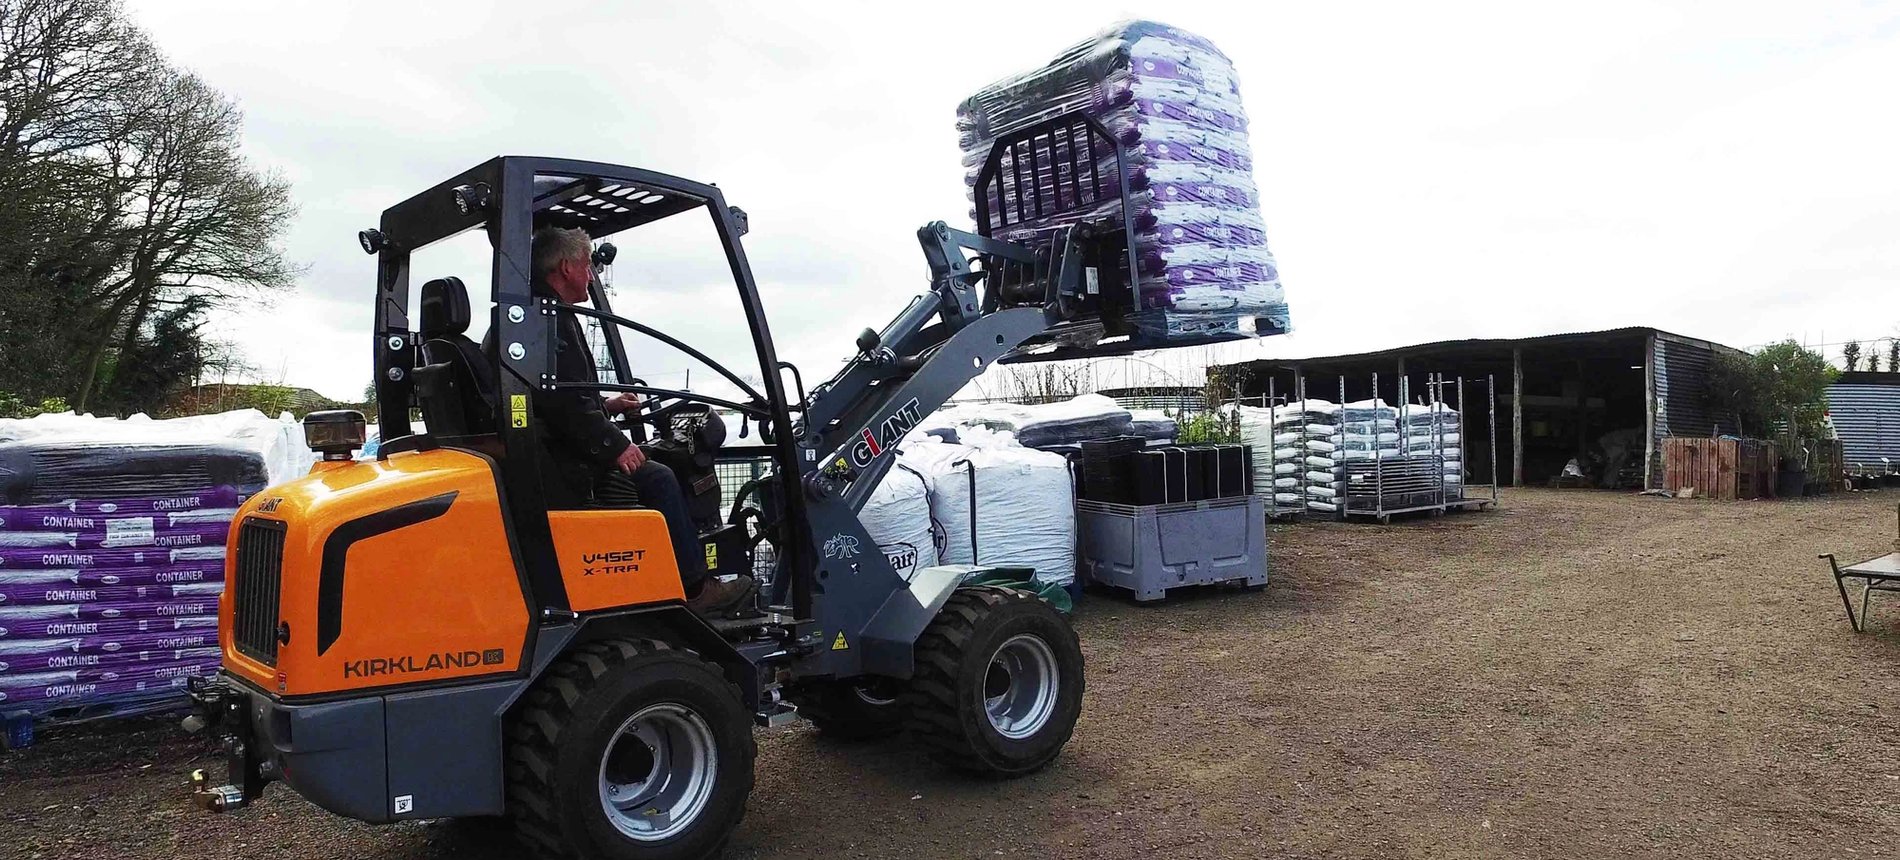 Maytree Nurseries- Thrilled With Their TOBROCO-GIANT Loader!